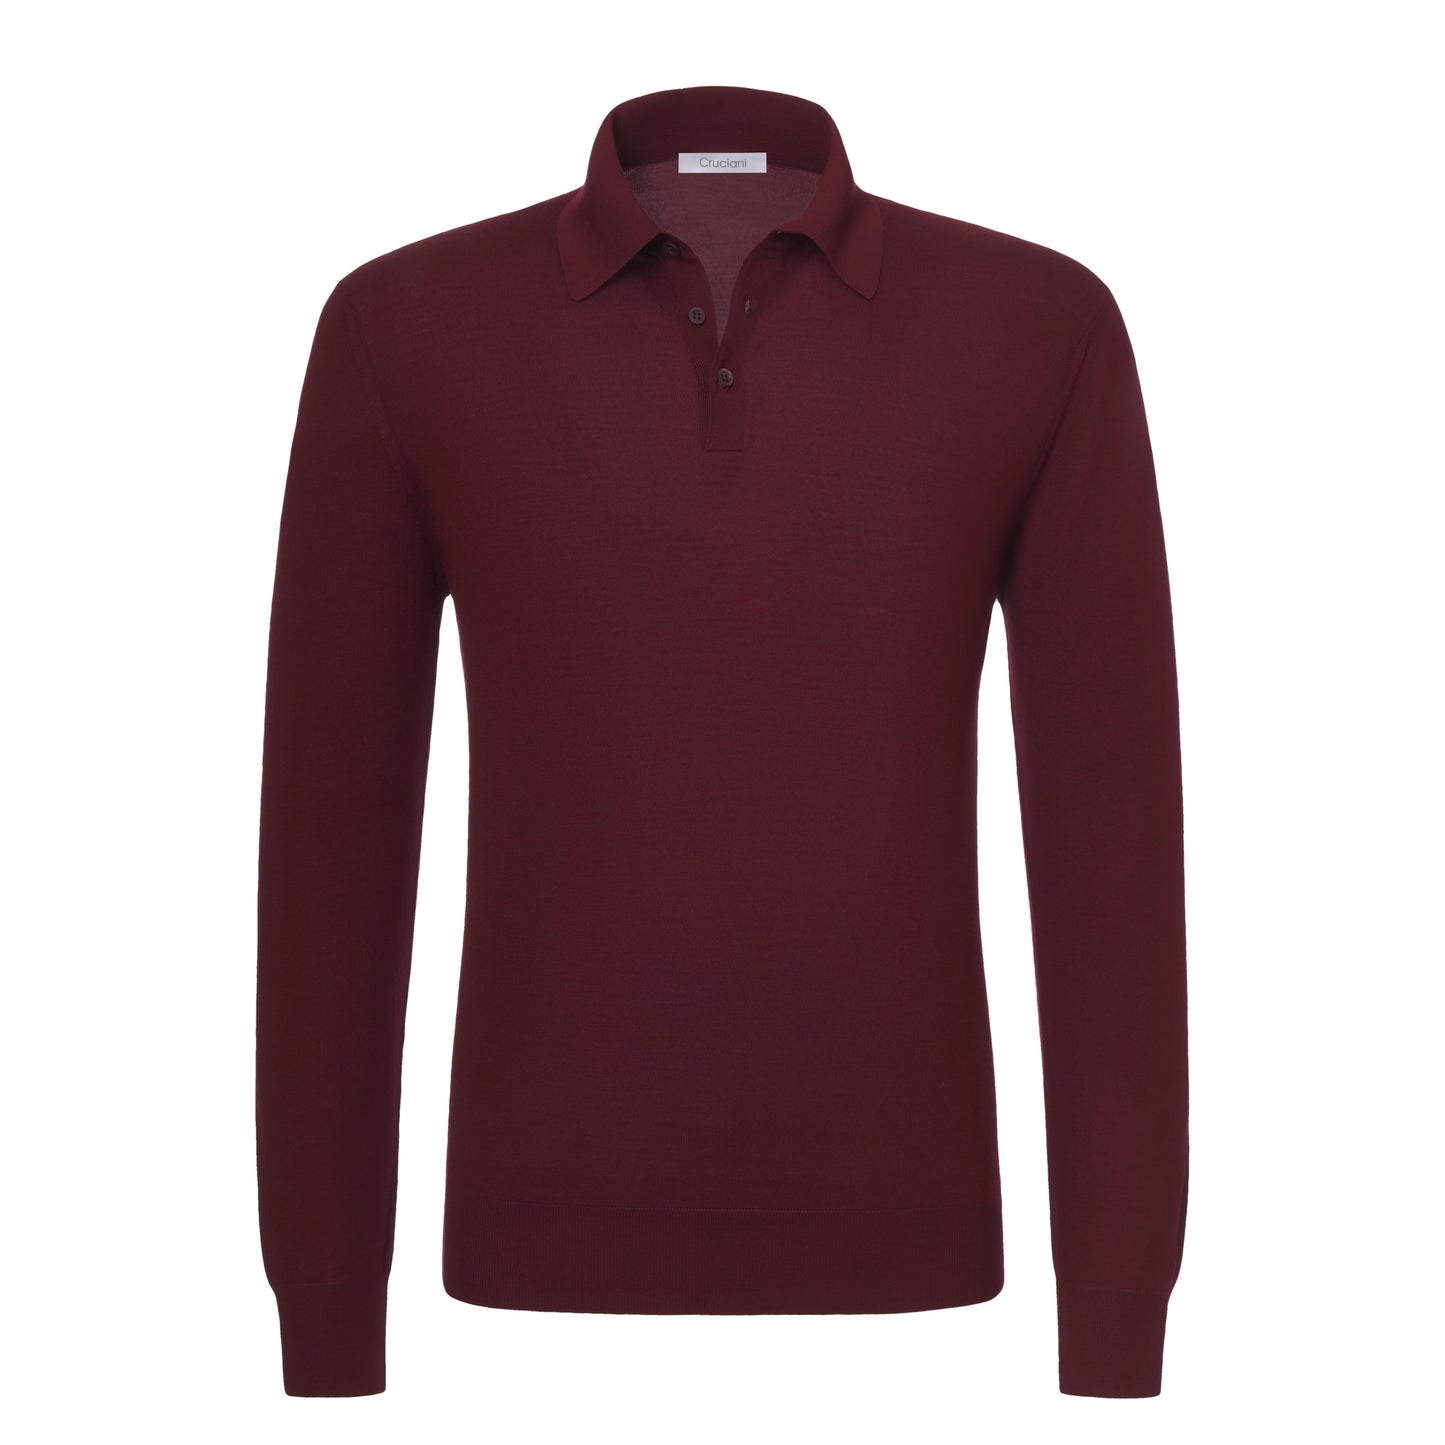 Wollpullover-Poloshirt in Rostrot